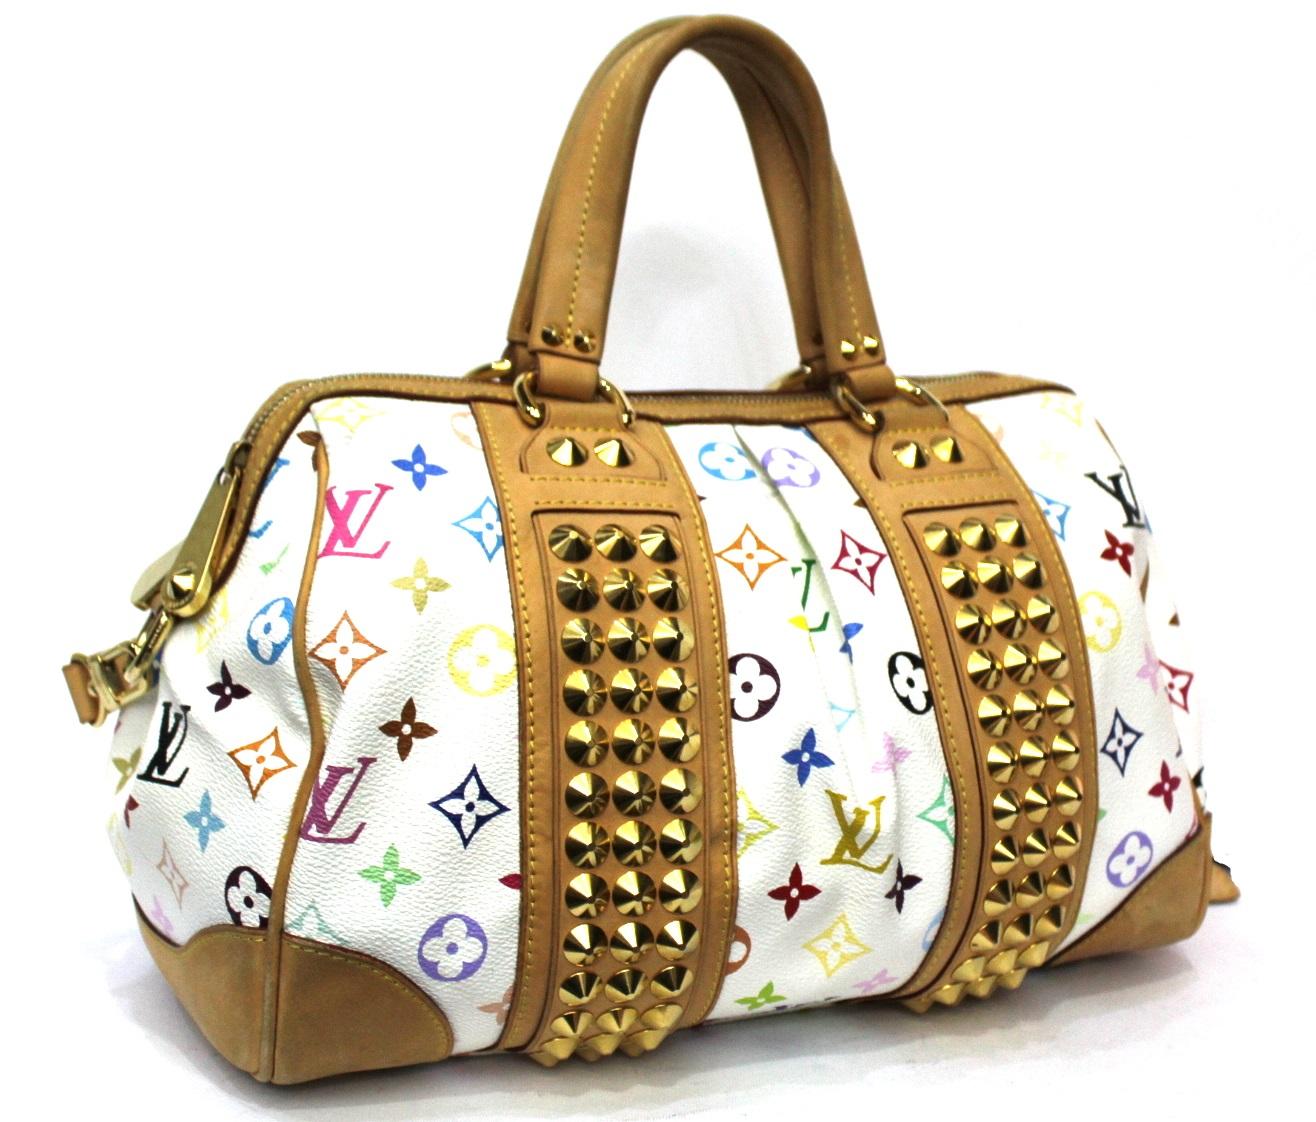 Louis Vuitton multicolor pattern Courtney model. Enriched with golden studs and hardware.
Equipped with double handle and removable cowhide shoulder strap.
Zip closure, internally very large.
It is in excellent condition, year 2009.